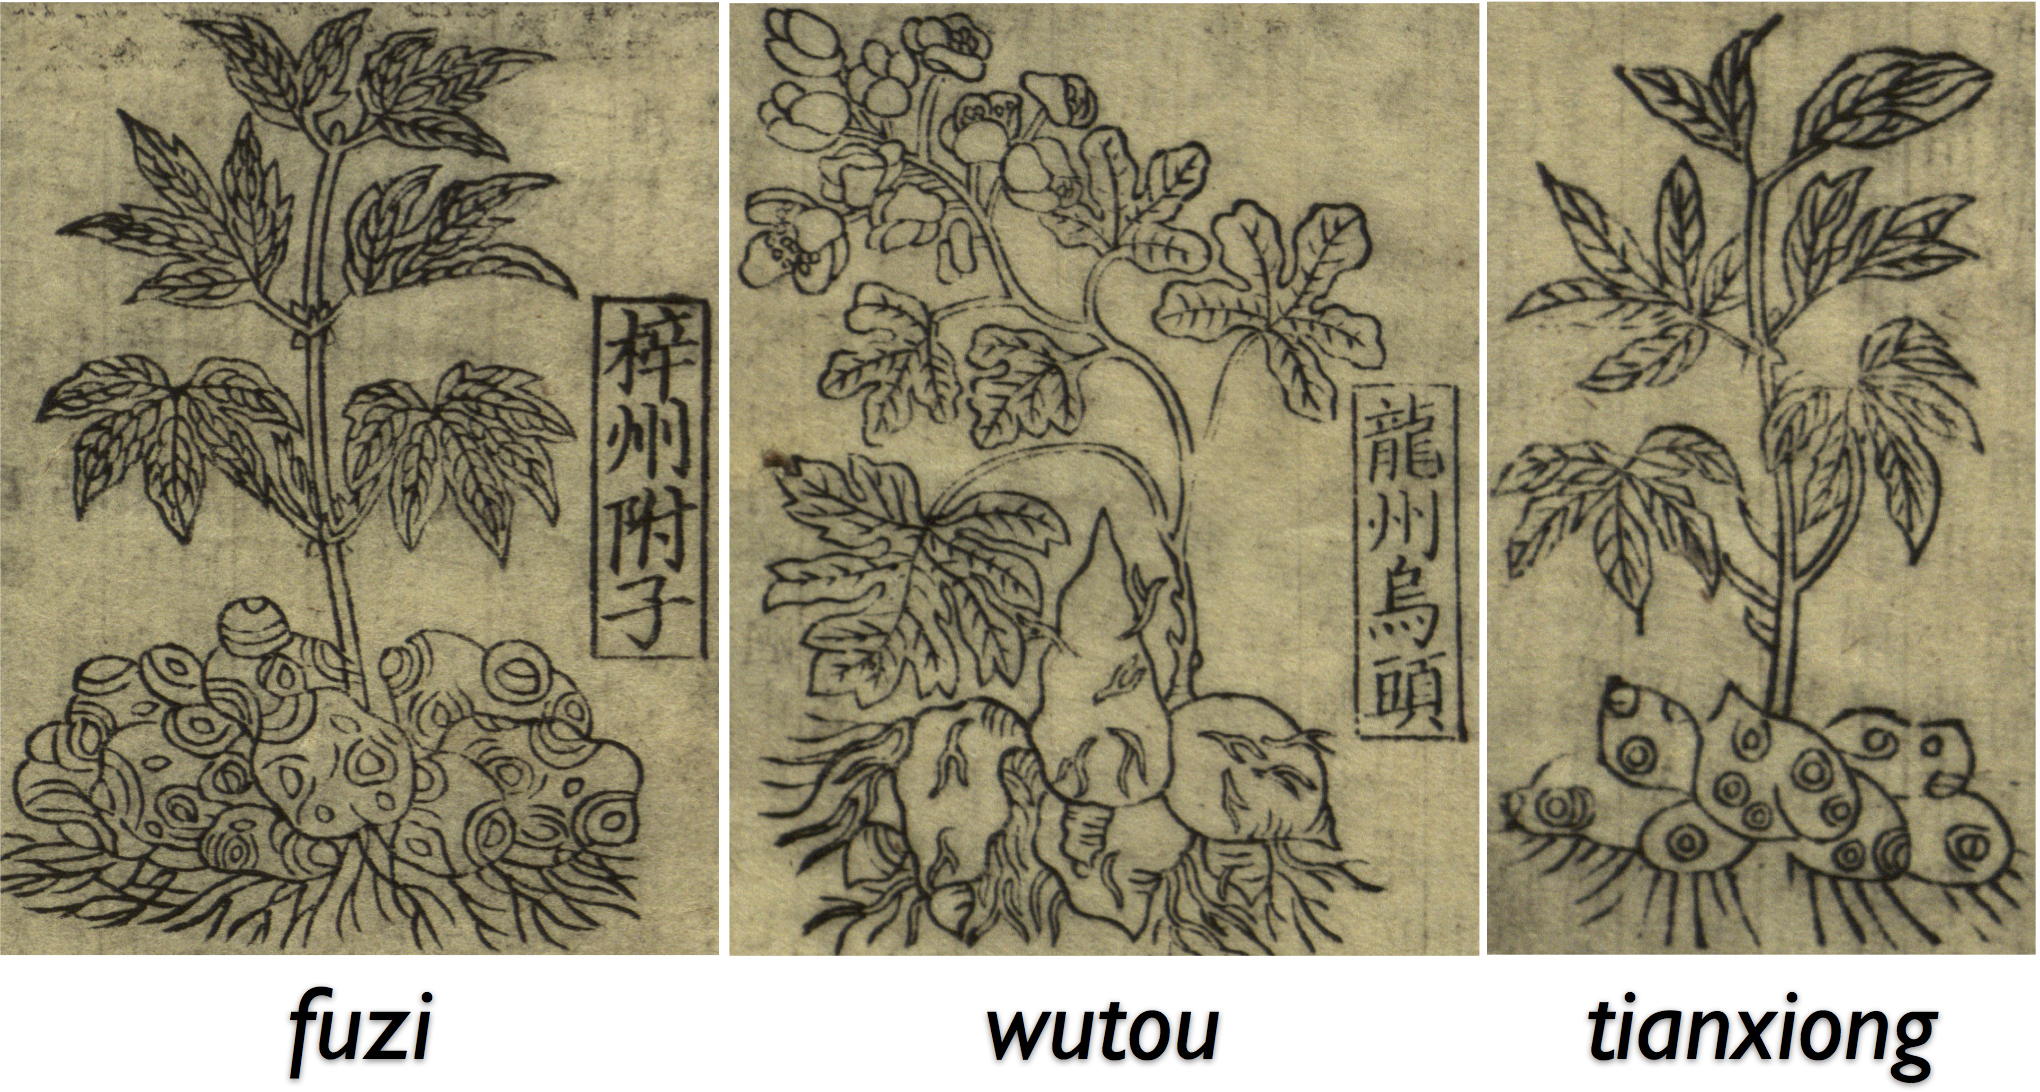 Three botanical drawings of similar but somewhat different plants, each showing tubers, leaves, stems, and flowers, above the labels <i>fuzi</i>, <i>wutou</i>, and <i>tianxiong</i>. The first two illustrations also include labels in Chinese indicating the plant’s geographic source.